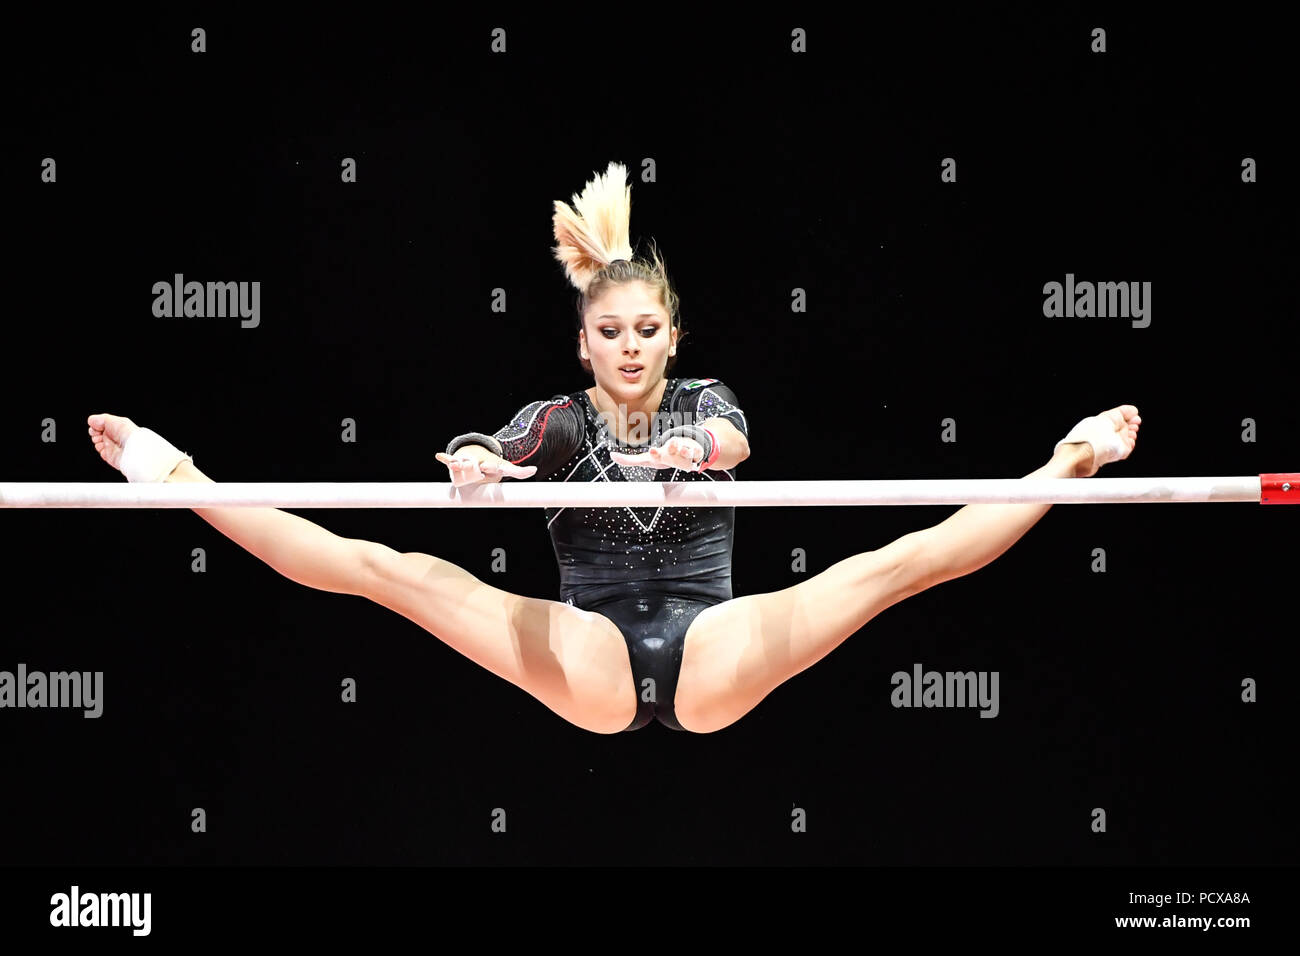 Glasgow, UK, 4 Aug 2018. GRISETTI Giada ITA competes on Uneven Bars in Women's Artistic Gymnastics Team Final during the European Championships Glasgow 2018 at The SSE Hydro on Saturday, 04 August 2018. GLASGOW SCOTLAND . Credit: Taka G Wu Credit: Taka Wu/Alamy Live News Stock Photo